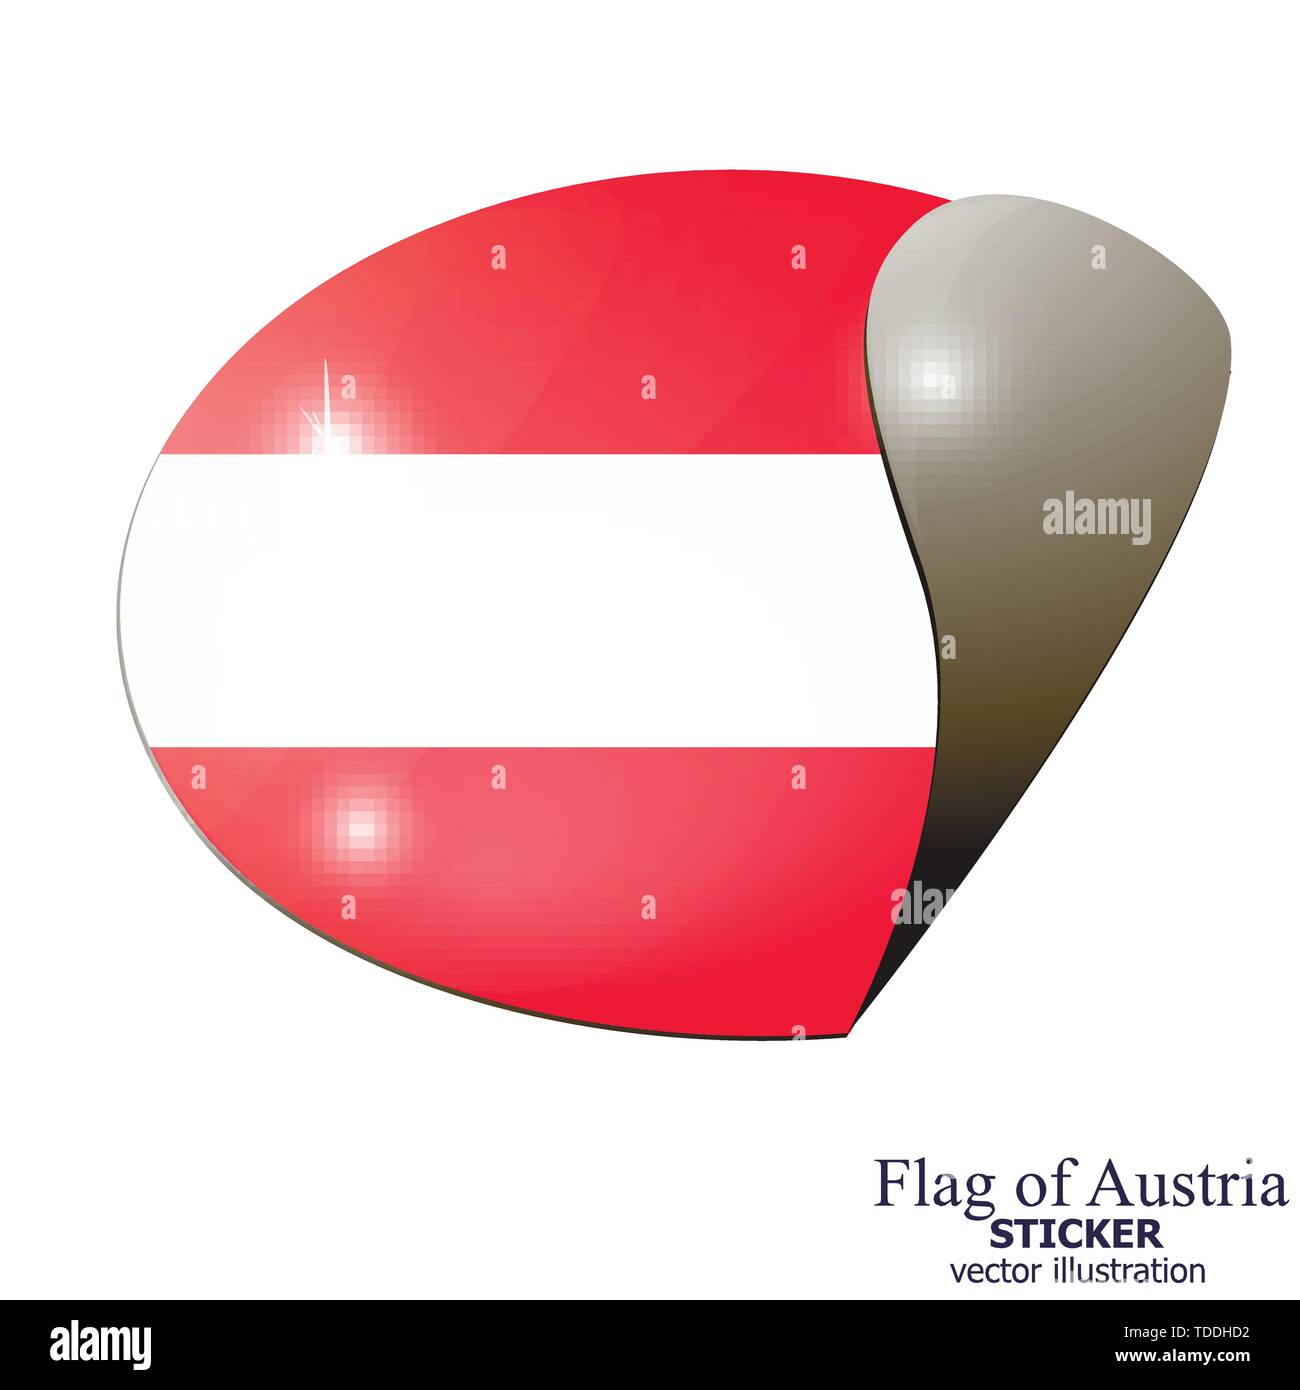 Bright sticker with flag of Austria. Happy Austria day background. Bright illustration with flag and white background. Stock Vector